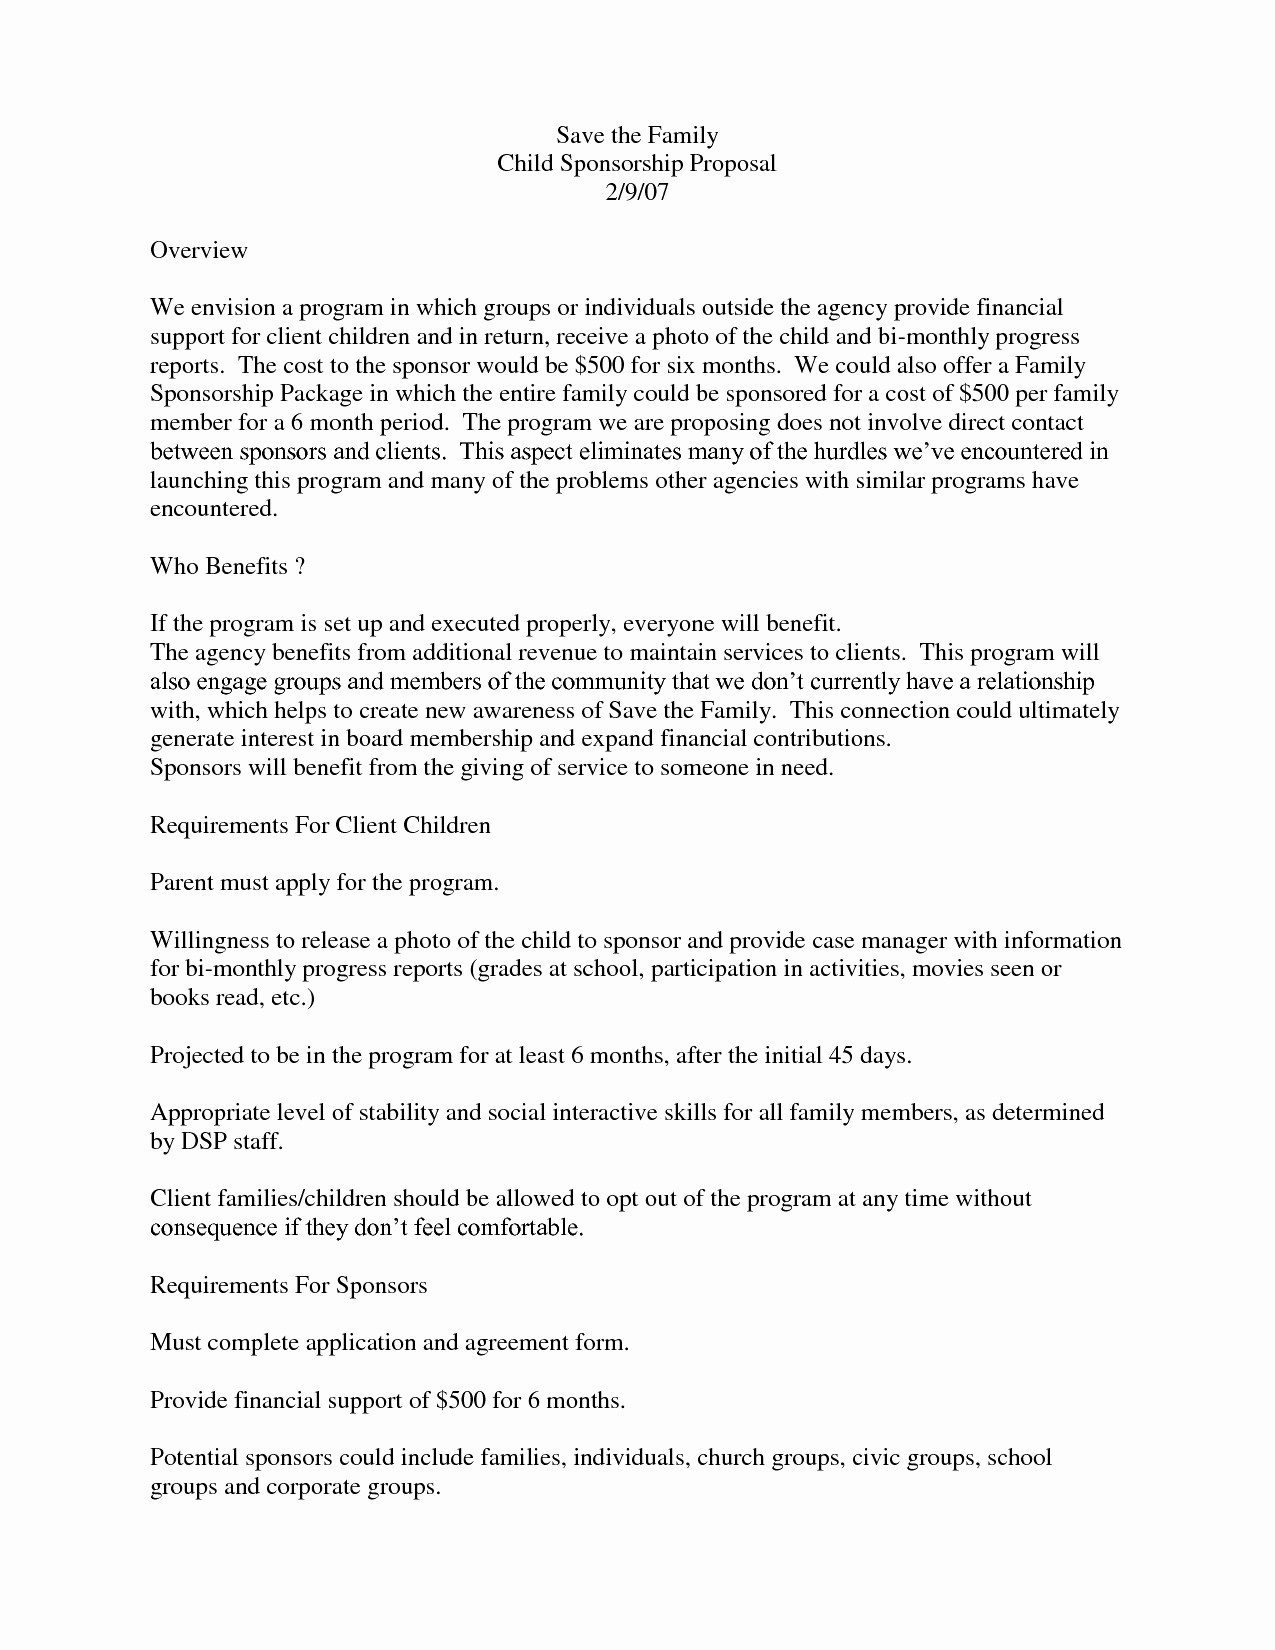 Sample Of Child Custody Agreement Voluntary Child Support Agreement Letter Between Parents Voluntary